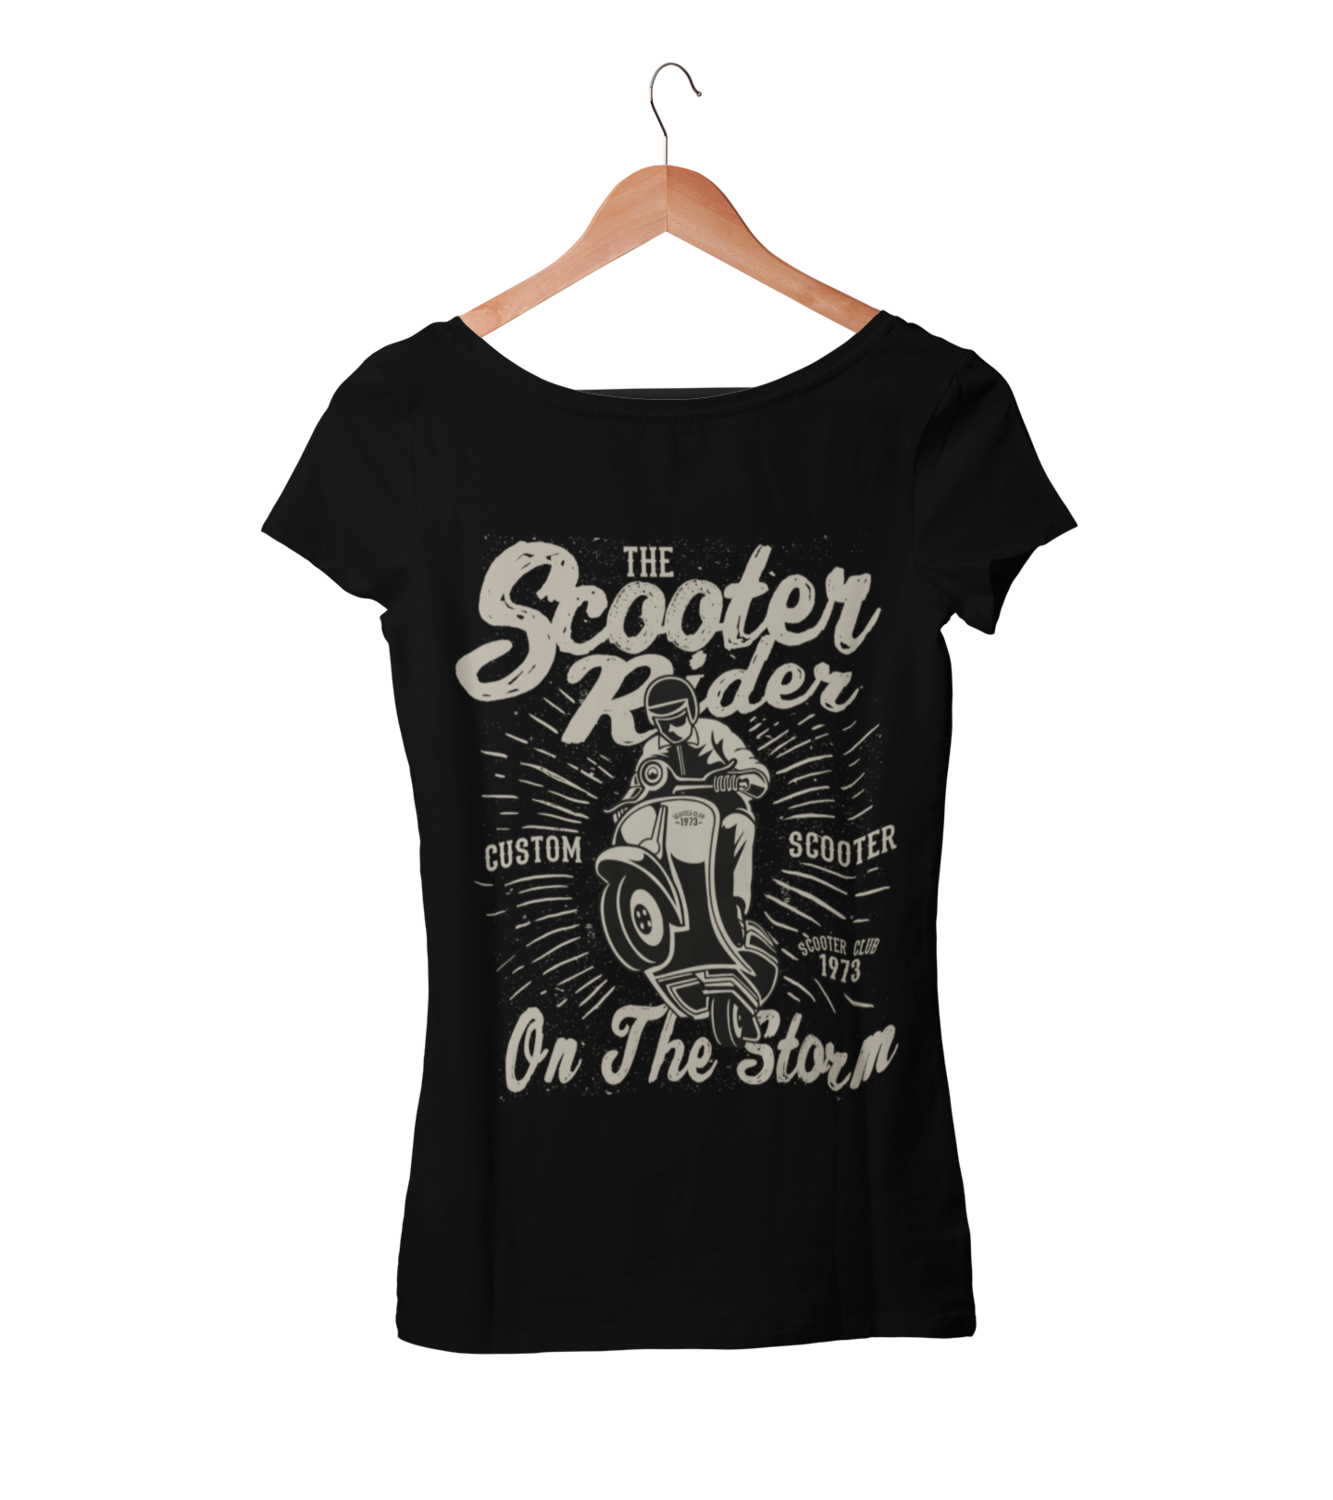 SCOOTER RIDER T-SHIRT FOR WOMEN